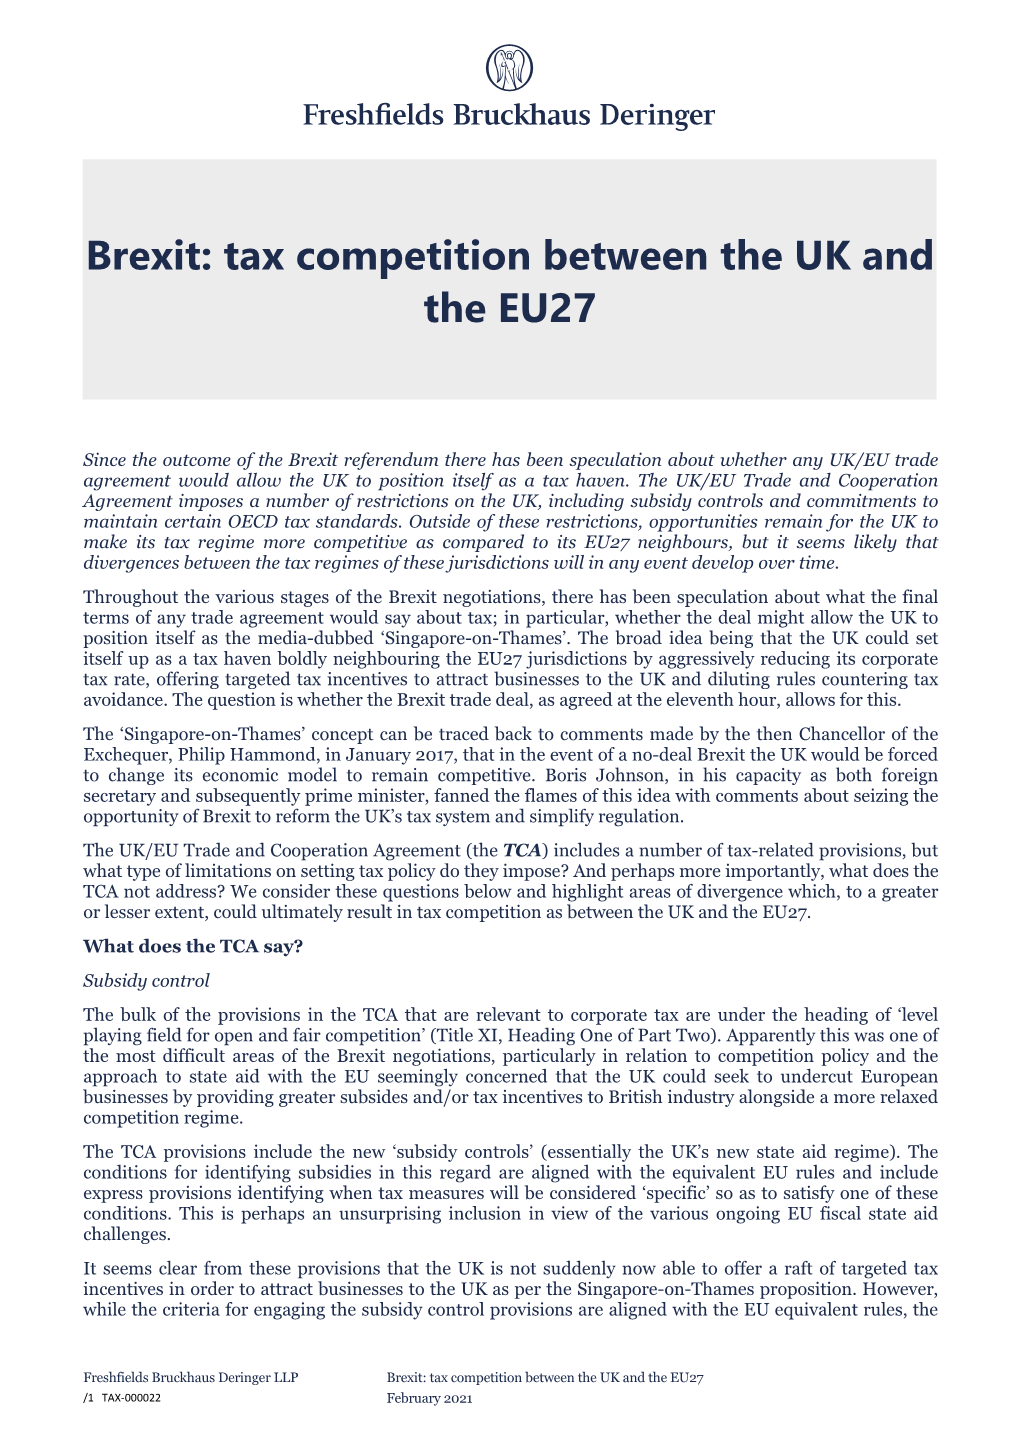 Brexit Tax Competition Between the UK and the EU27